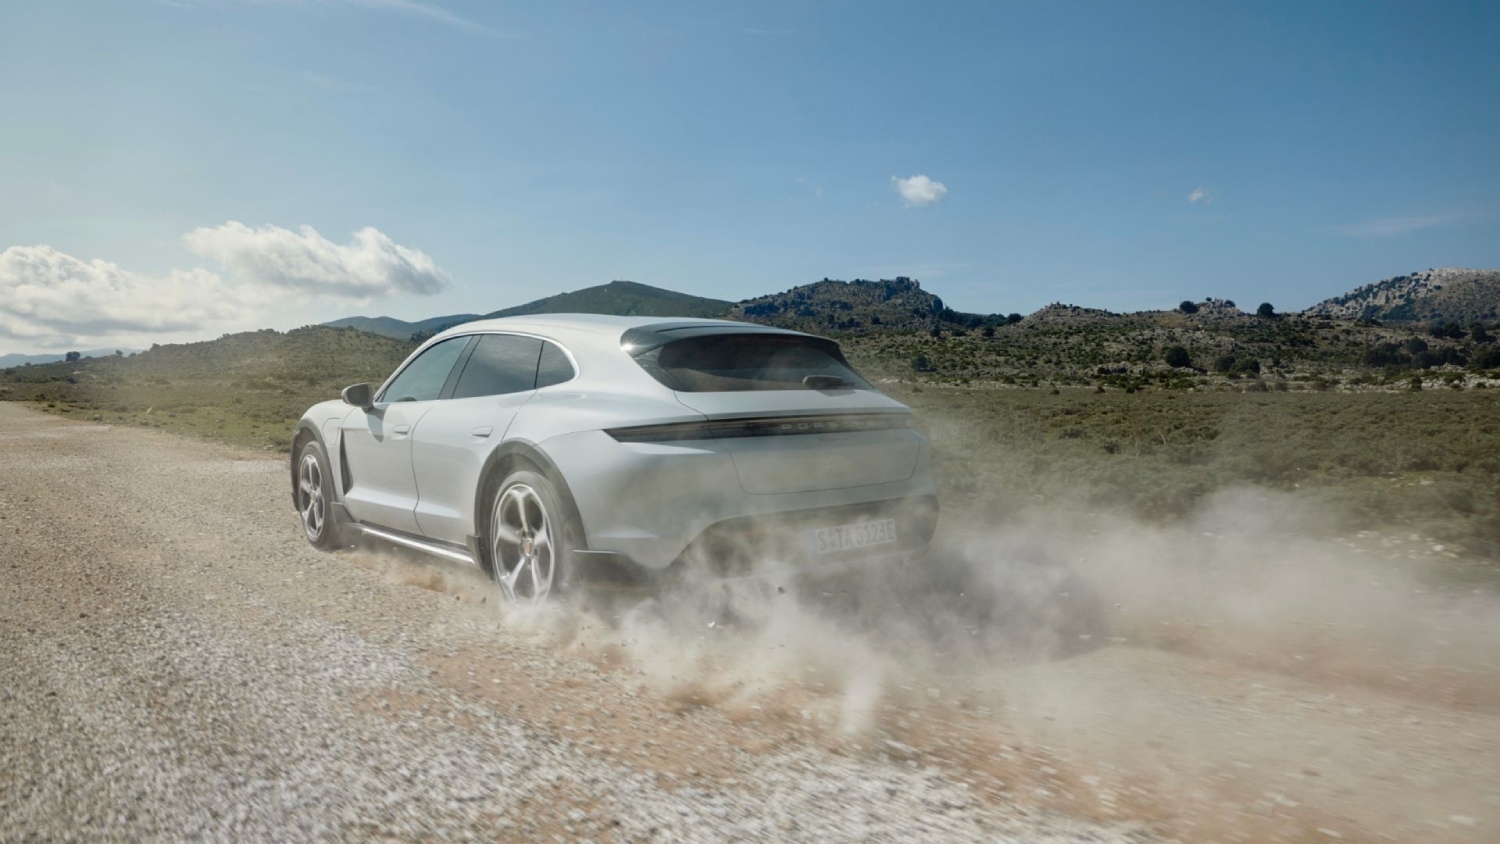 These electric sports cars like the Porsche Taycan offer the best of both worlds